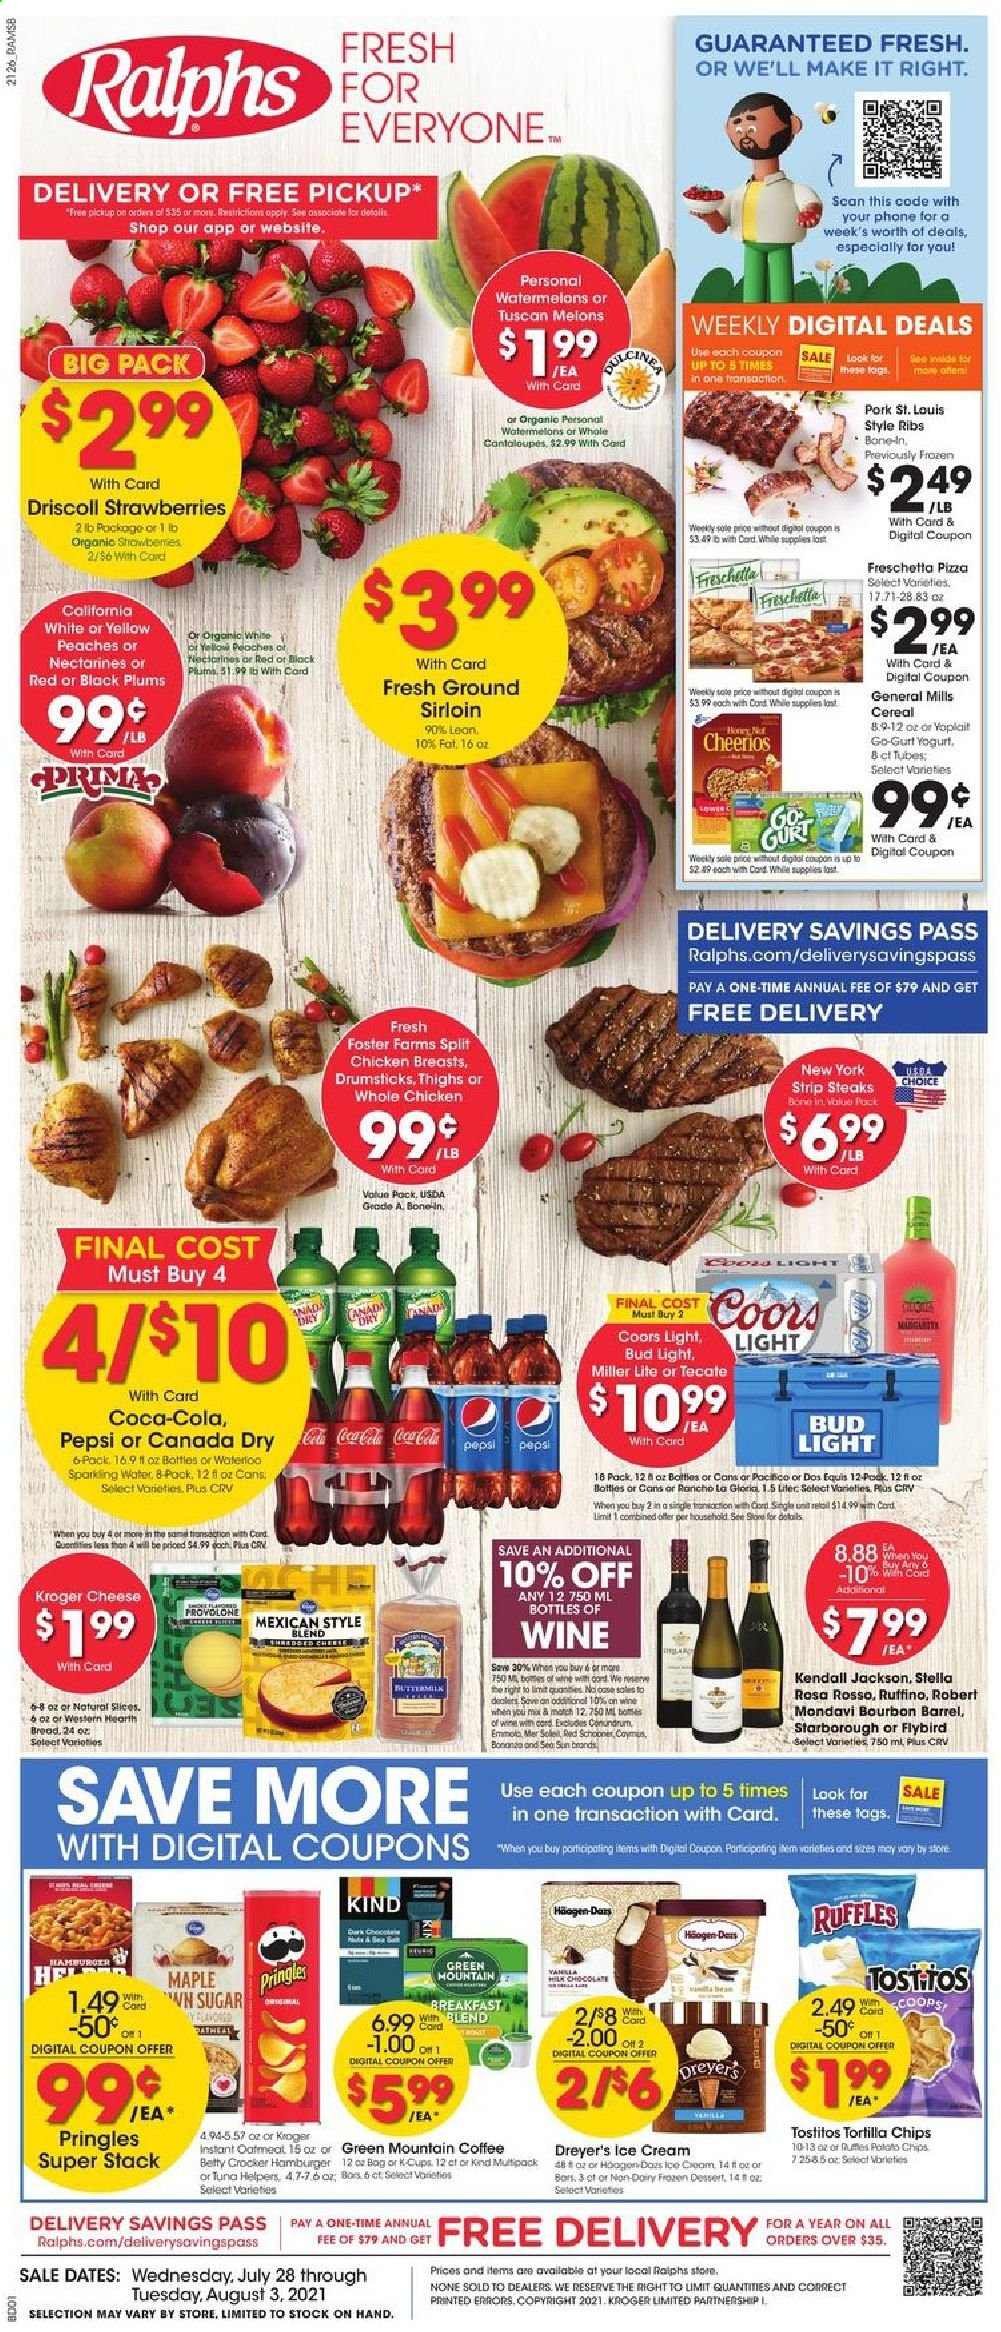 thumbnail - Ralphs Flyer - 07/28/2021 - 08/03/2021 - Sales products - plums, bread, cod, tuna, pizza, hamburger, yoghurt, Yoplait, ice cream, Häagen-Dazs, tortilla chips, Pringles, Ruffles, Tostitos, sugar, cereals, Cheerios, Canada Dry, Coca-Cola, Pepsi, sparkling water, coffee, L'Or, Green Mountain, wine, beer, Miller Lite, Coors, Bud Light, whole chicken, chicken breasts, beef meat, steak, striploin steak, bag, nectarines, melons, black plums, peaches. Page 1.